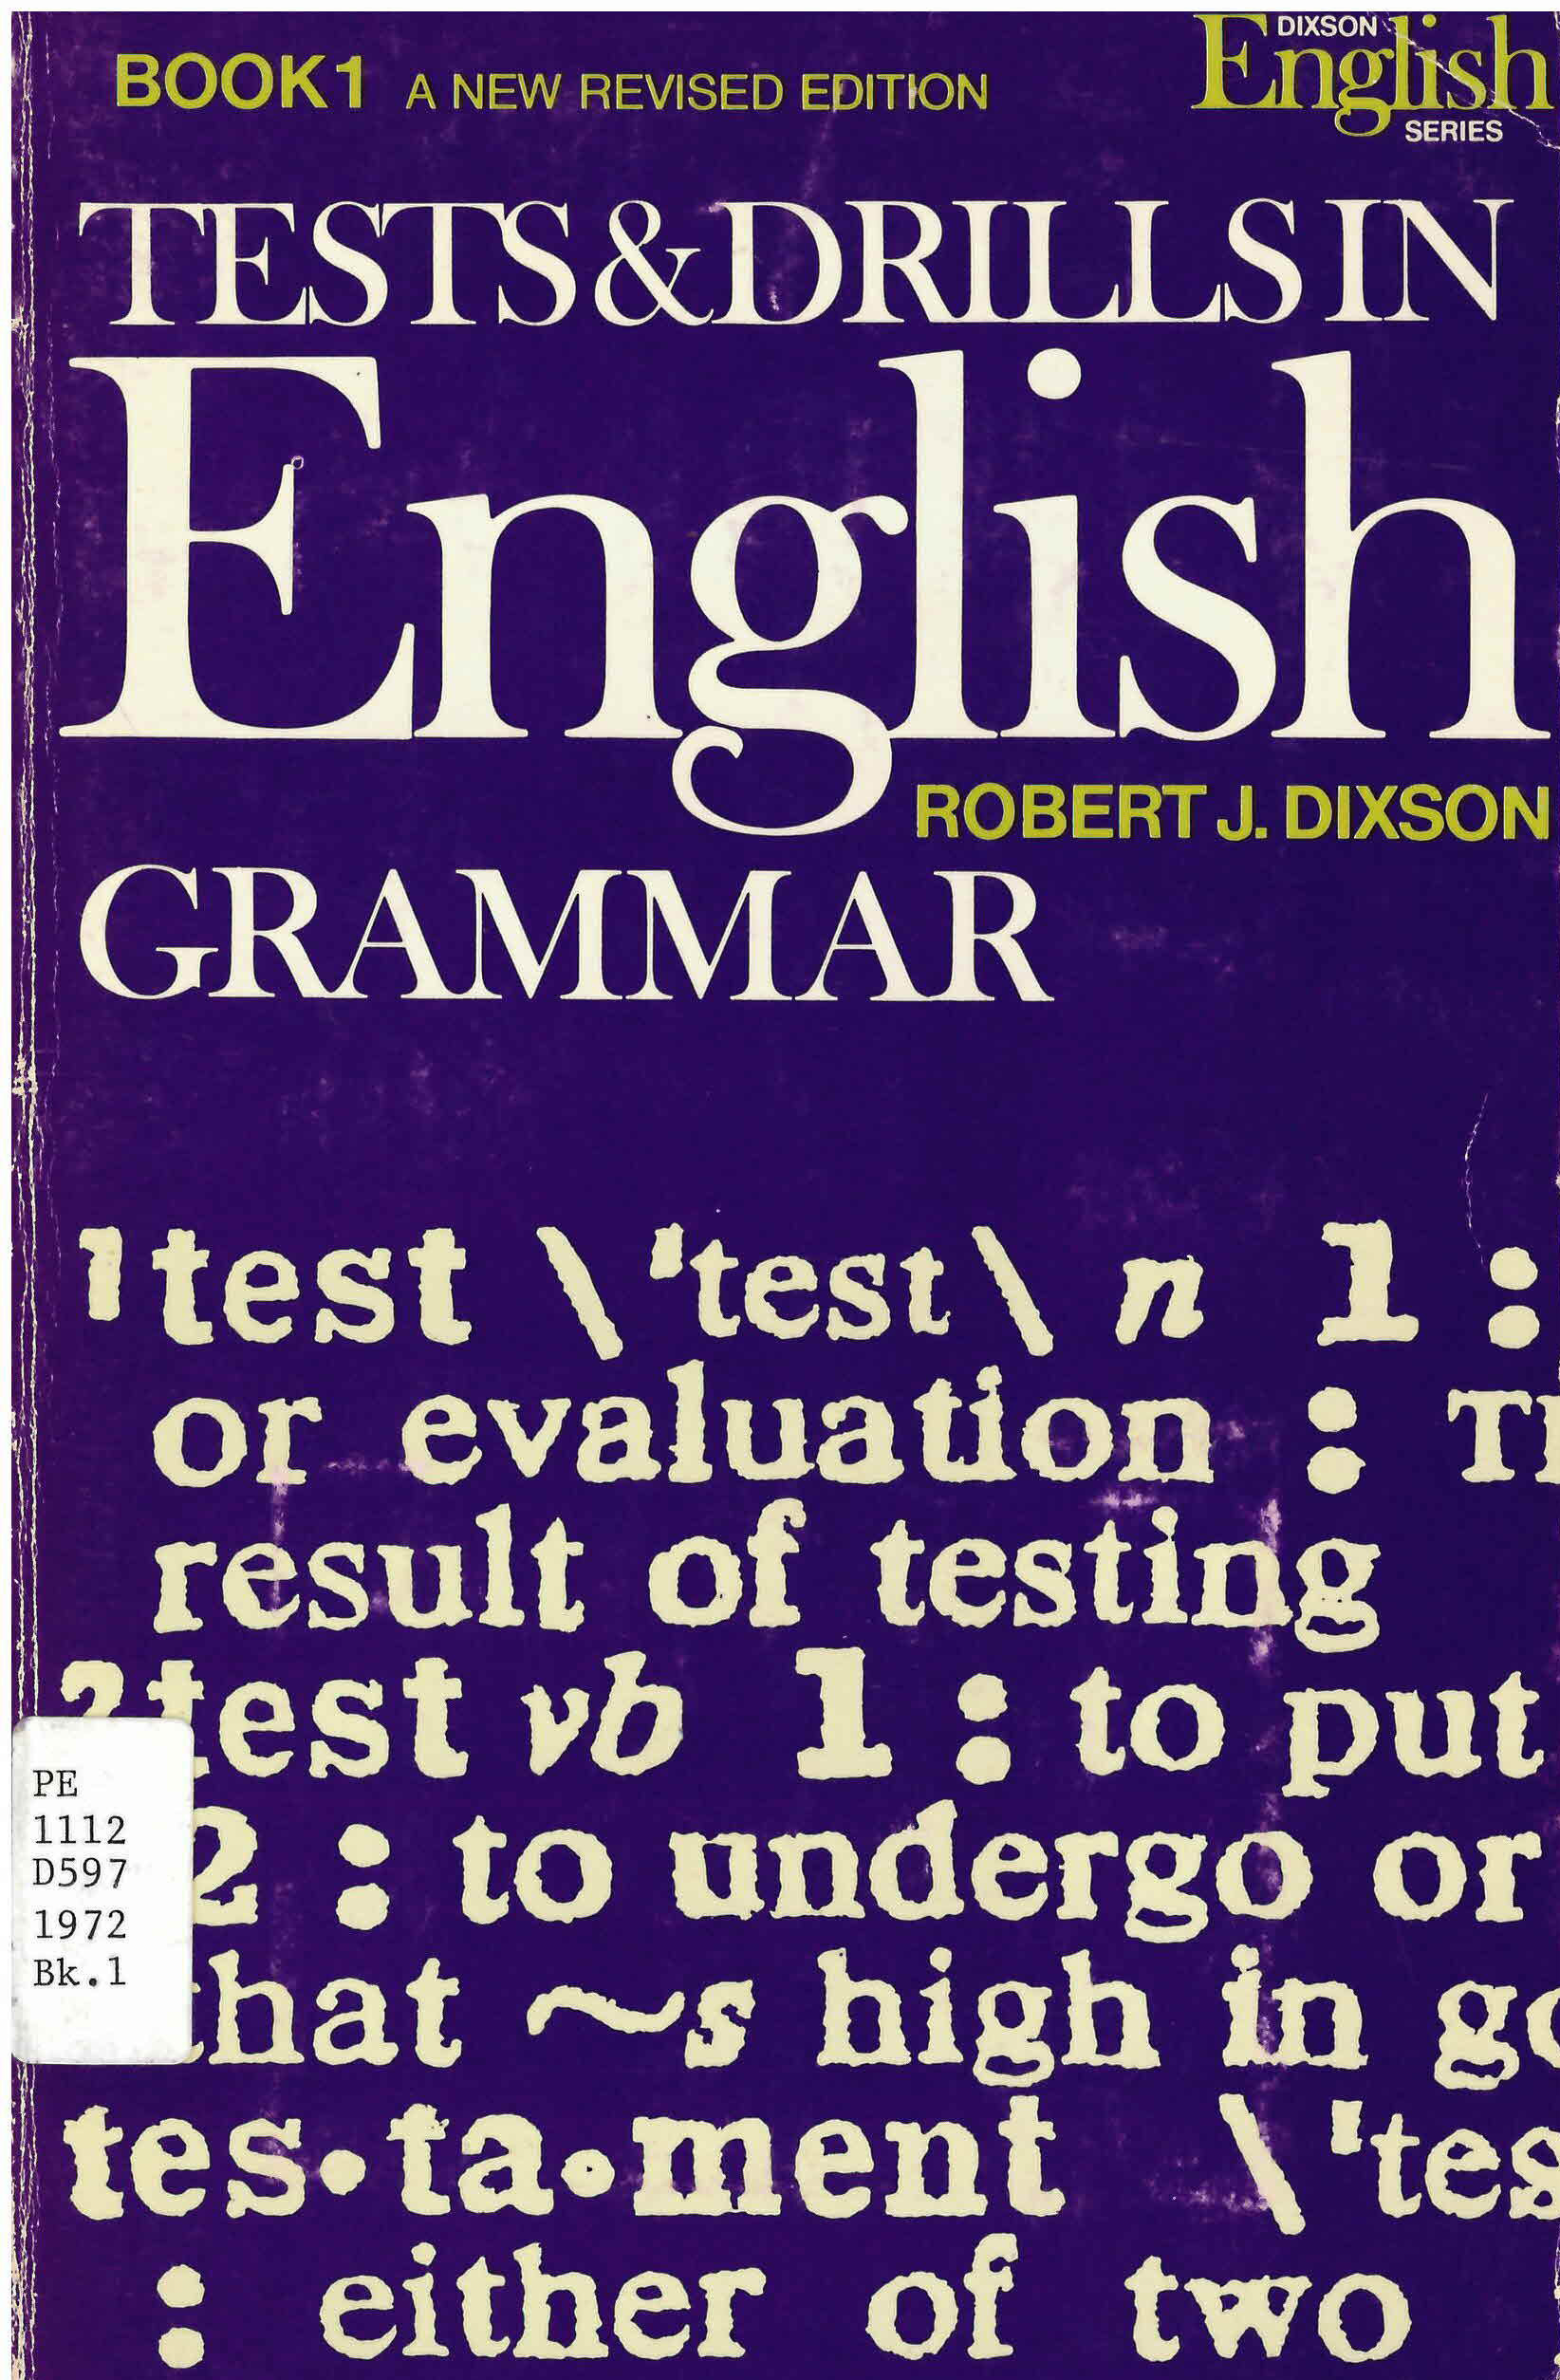 Tests and drills in English grammar